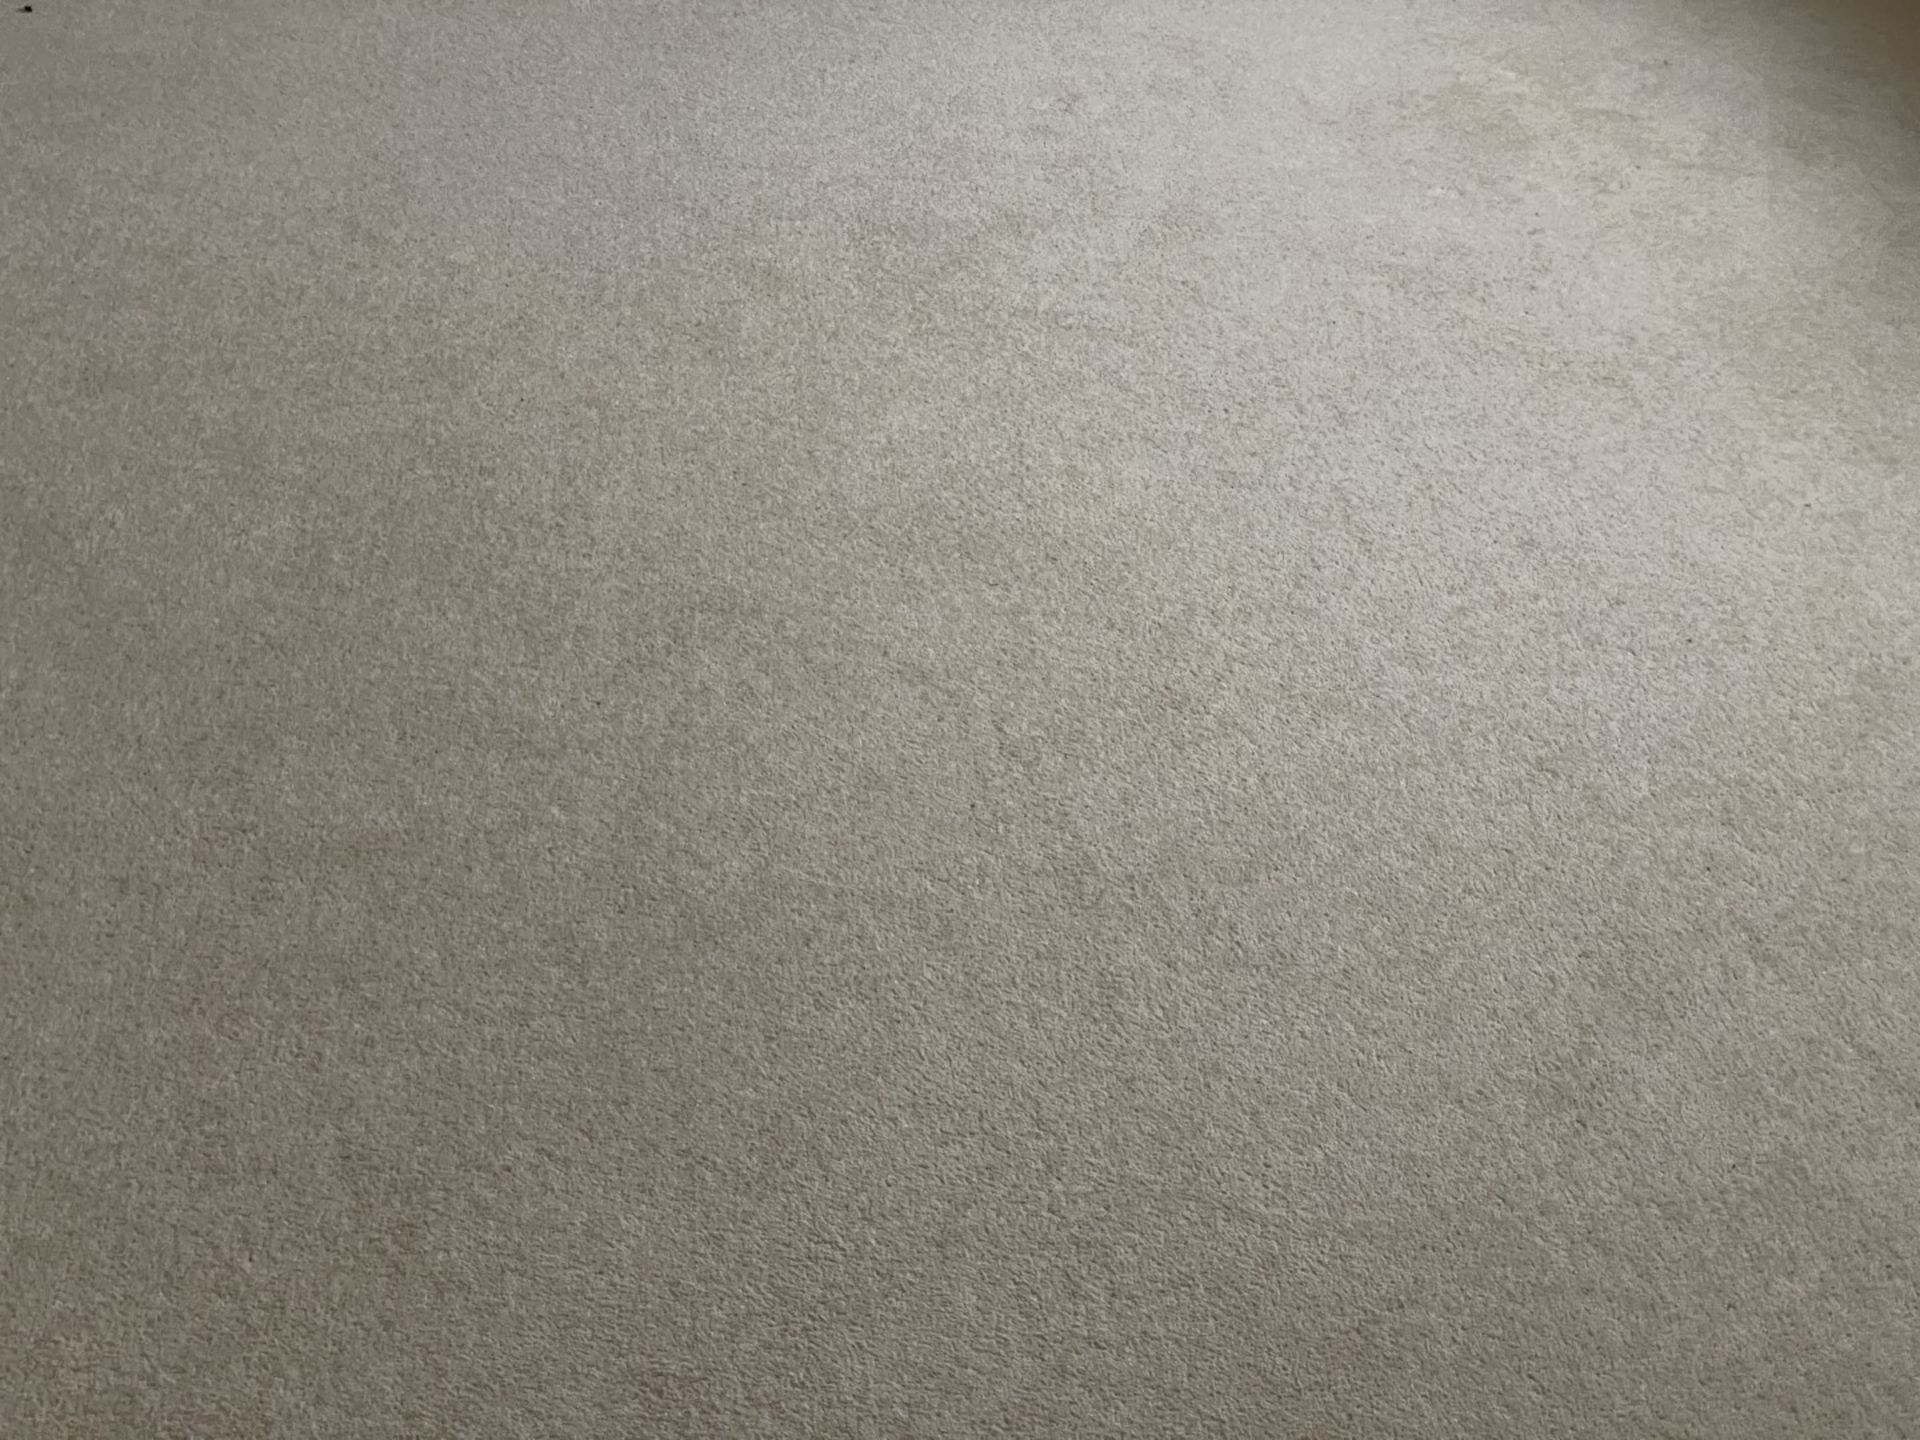 1 x Luxury Wool Bedroom + Dressing Room Carpets in a Neutral Tone with Premium Underlay - Image 11 of 11